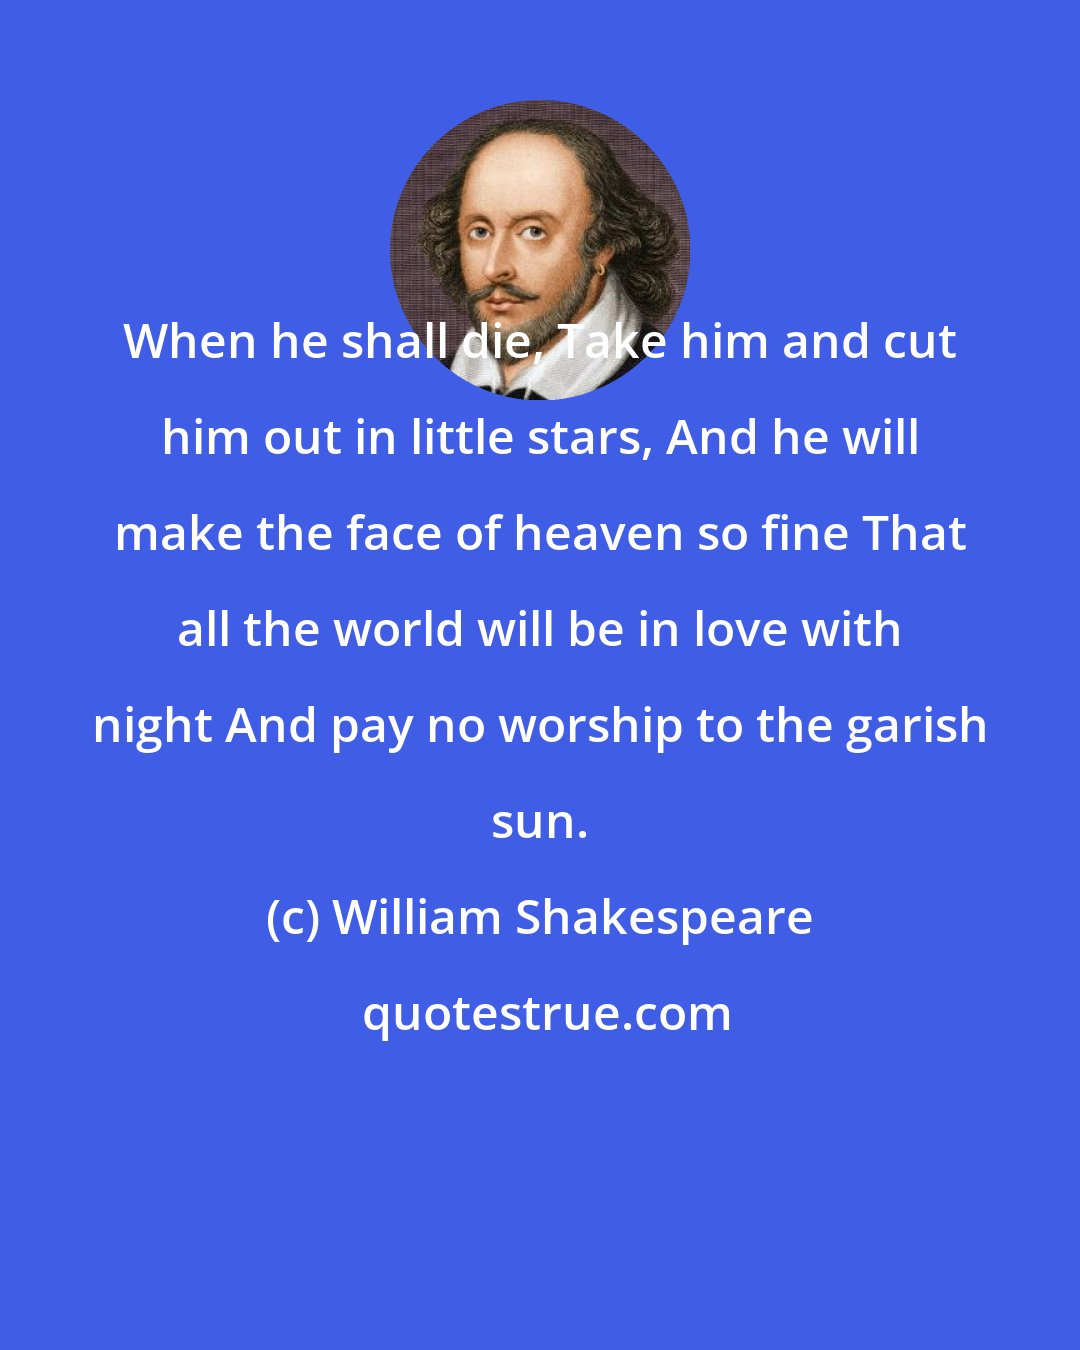 William Shakespeare: When he shall die, Take him and cut him out in little stars, And he will make the face of heaven so fine That all the world will be in love with night And pay no worship to the garish sun.